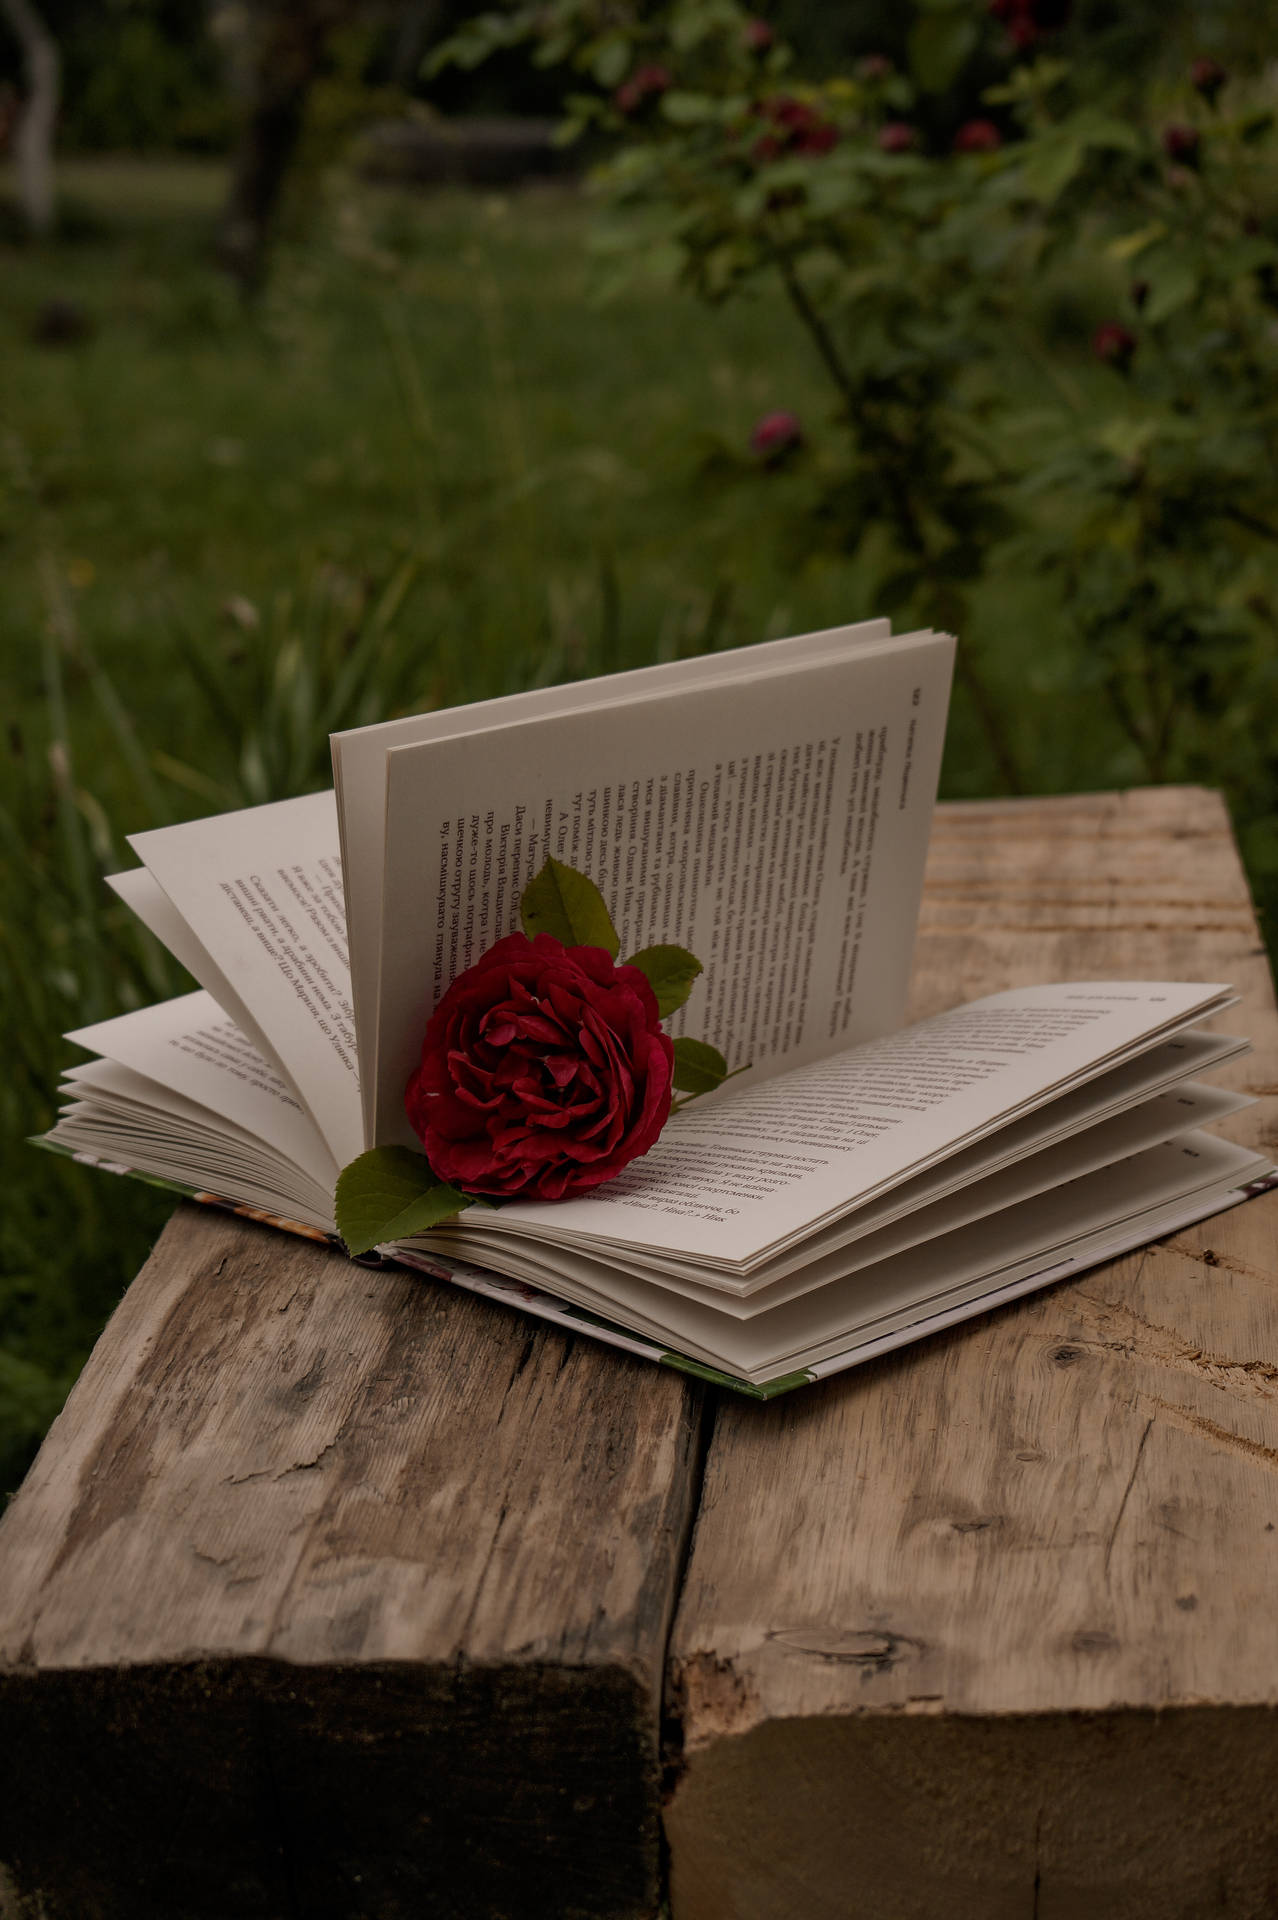 Reveal the beauty within: An open book with a rose sits on a green aesthetic background. Wallpaper